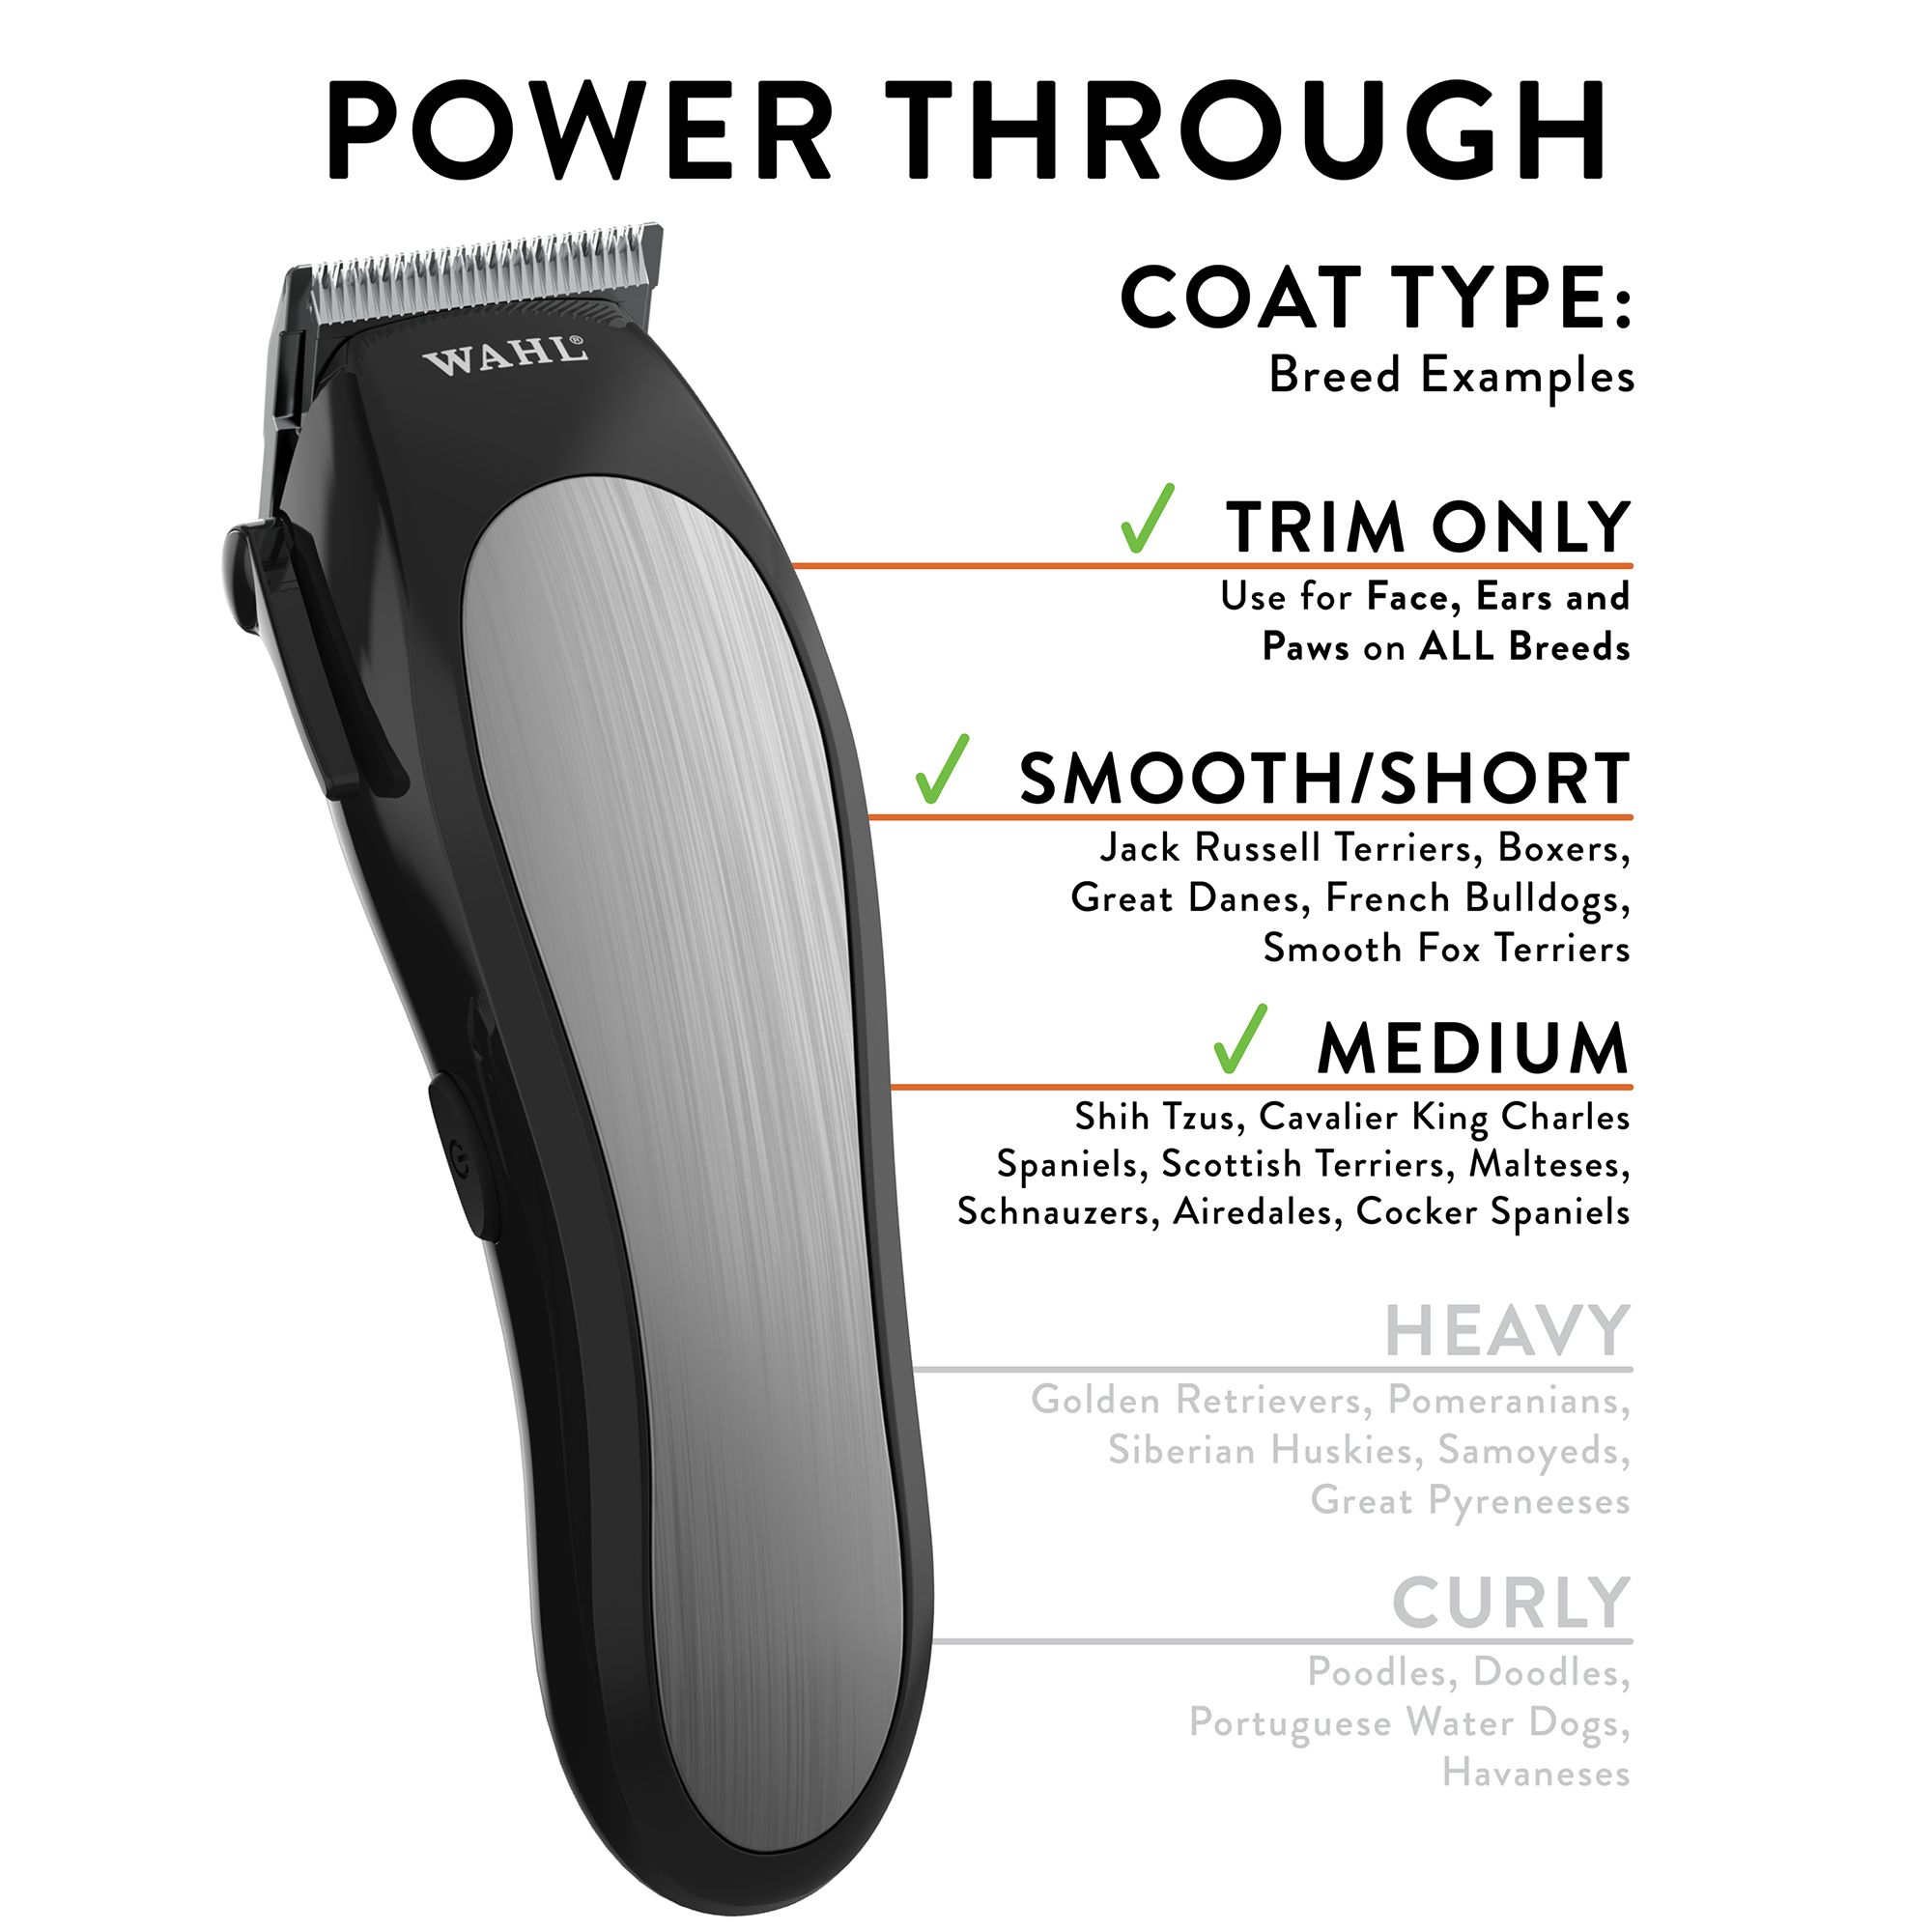 wahl combination dog clipper and trimmer set